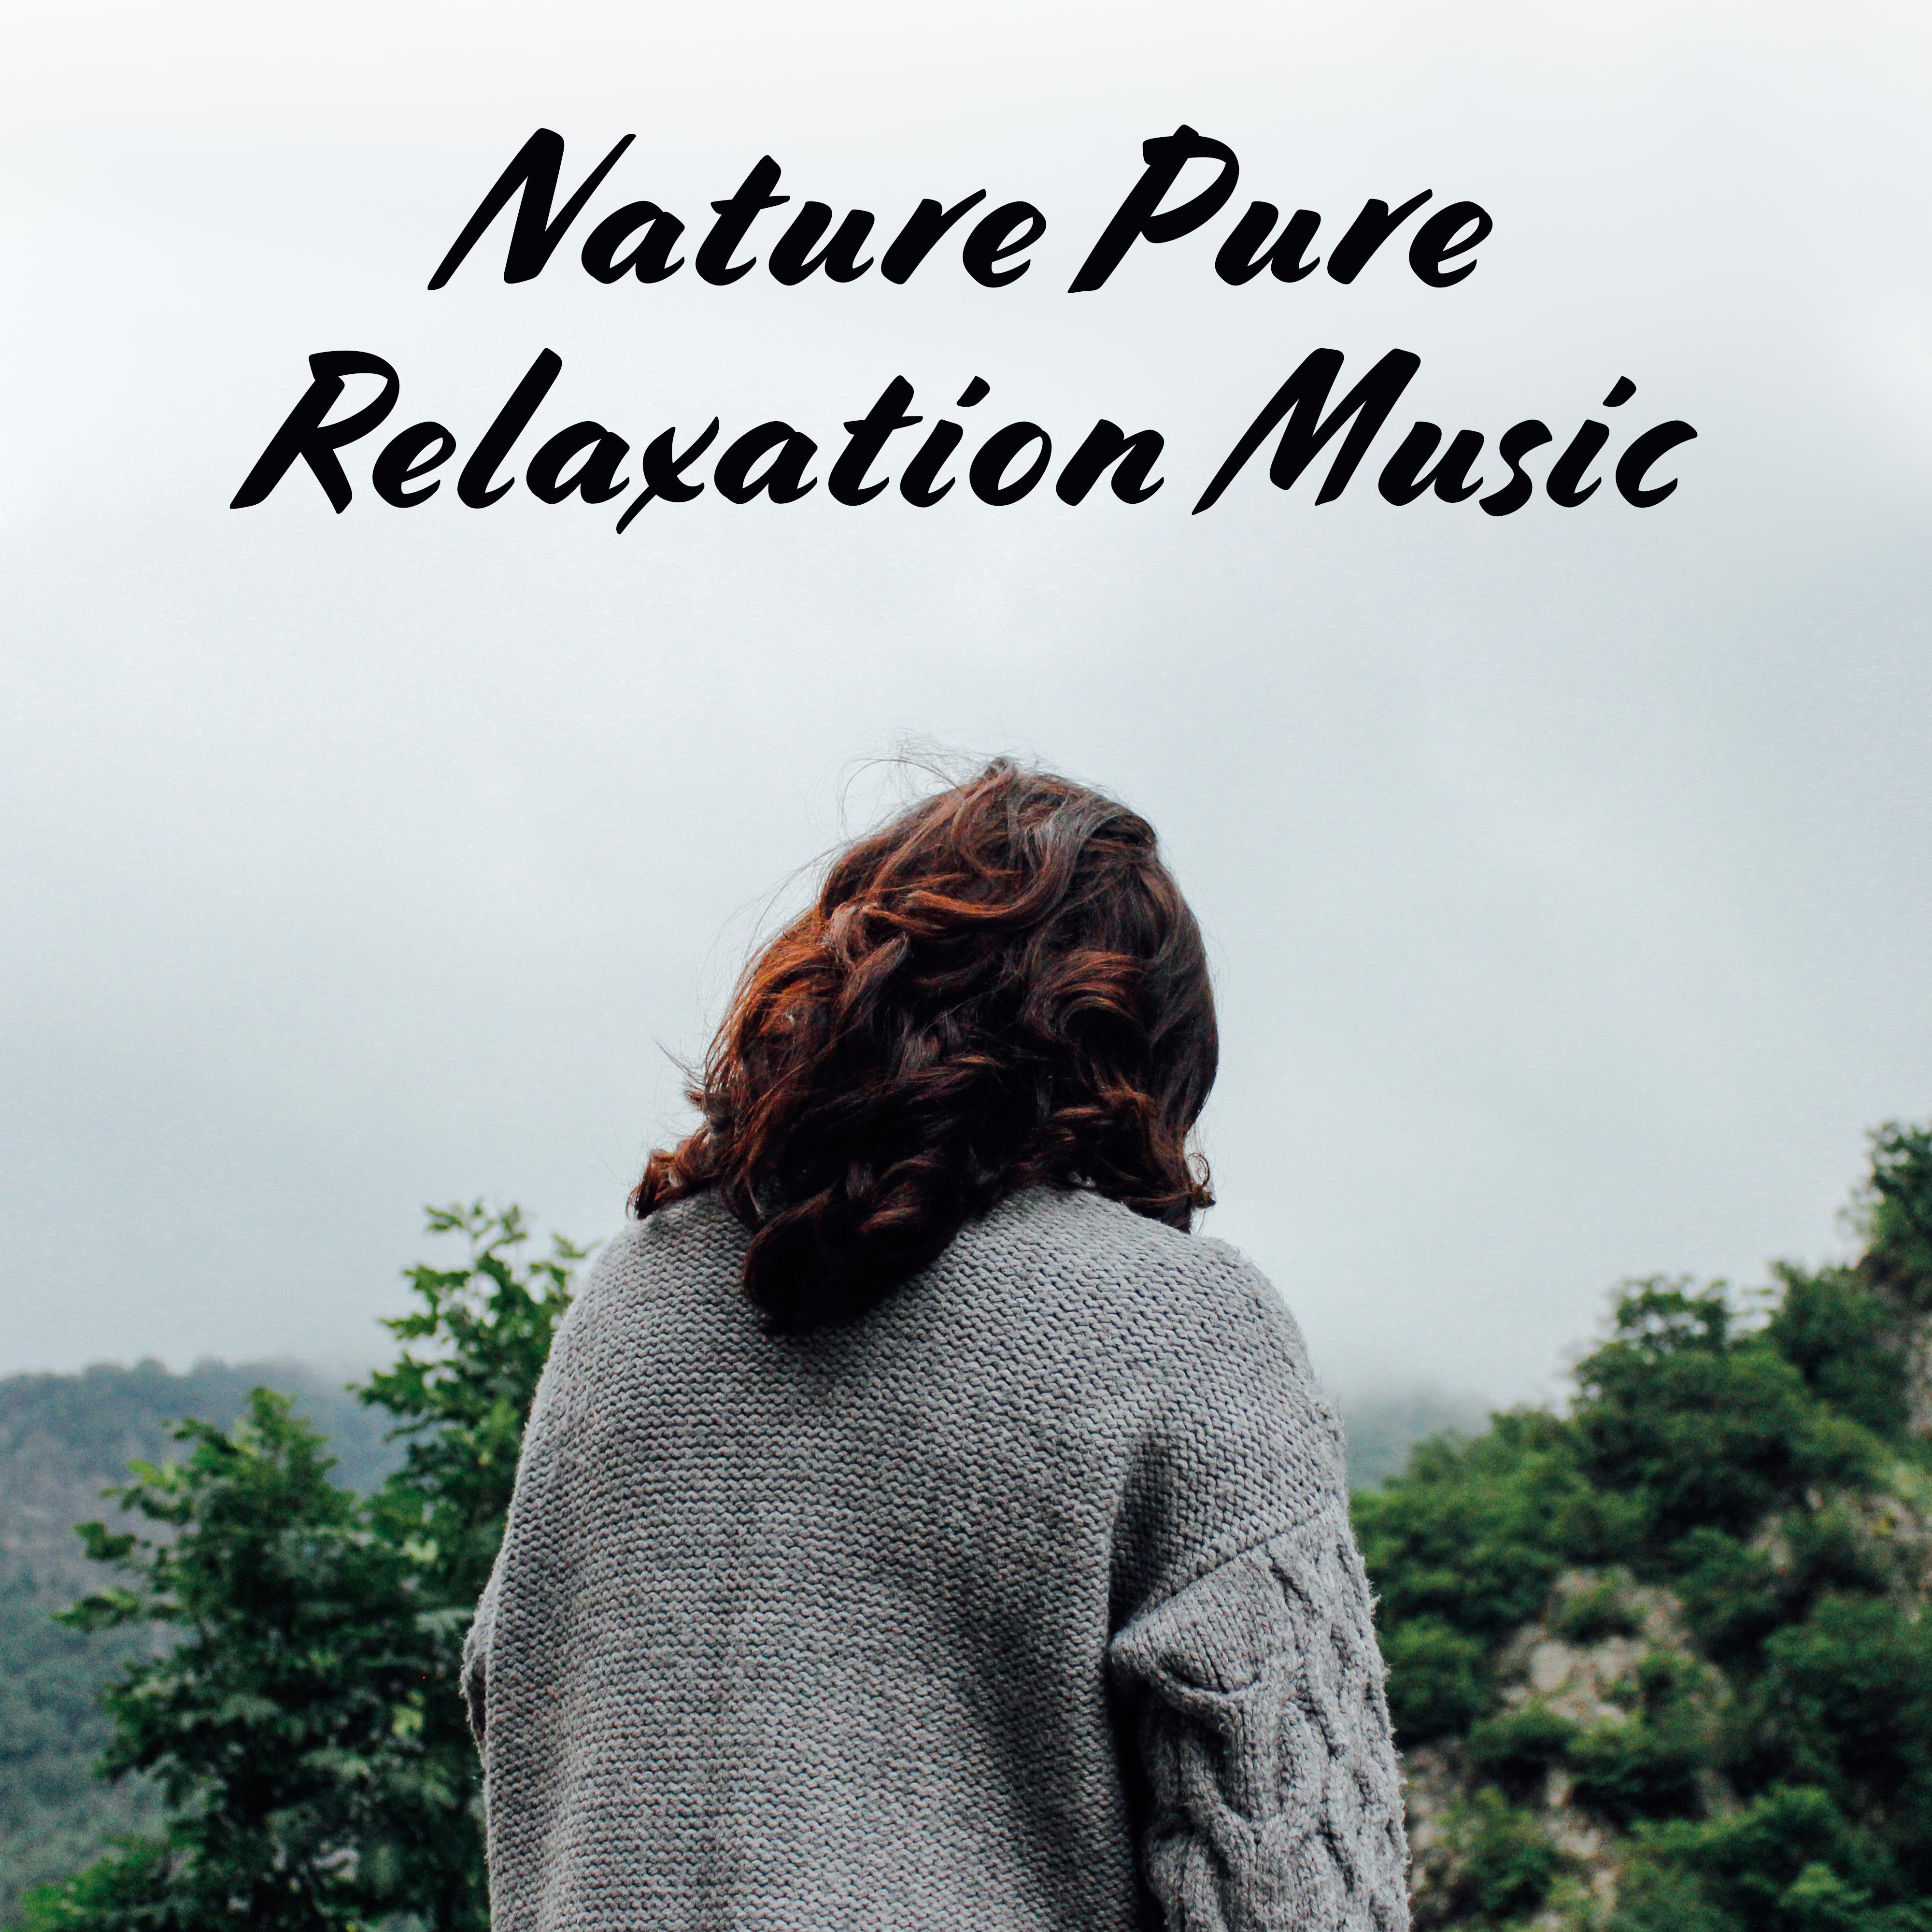 Nature Pure Relaxation Music: New Age 15 Soothing Songs for Calm & Relax After Tough Day